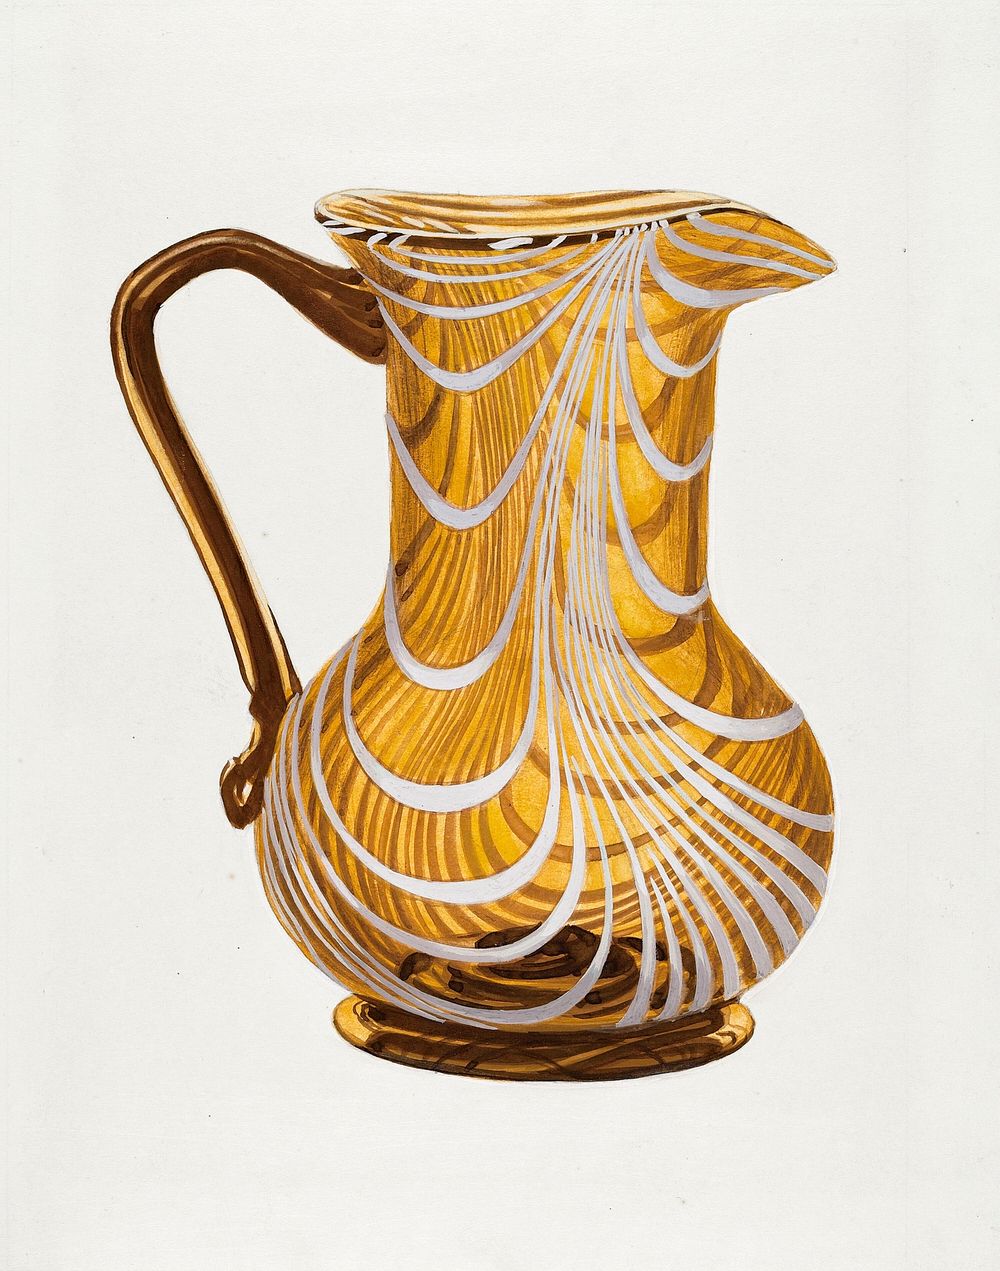 Glass Pitcher (1935&ndash;1942) by unknown American 20th Century artist. Original from The National Gallery of Art.…